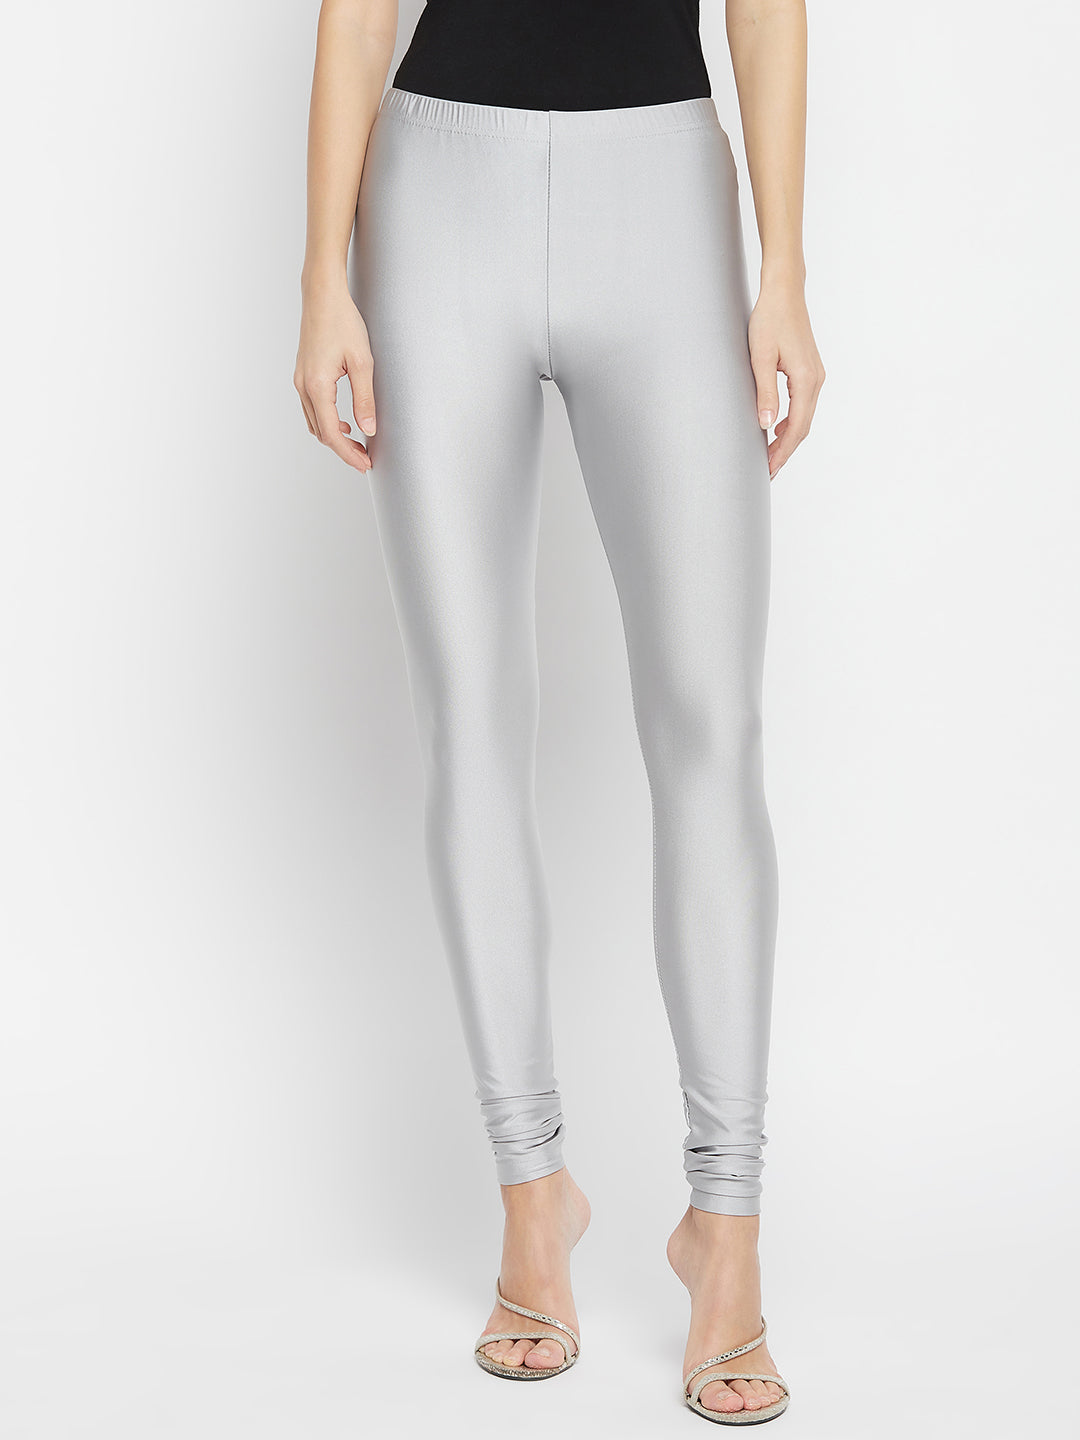 Footed Ethnic Wear Legging with Metallic touch Chudi Length - Light Grey